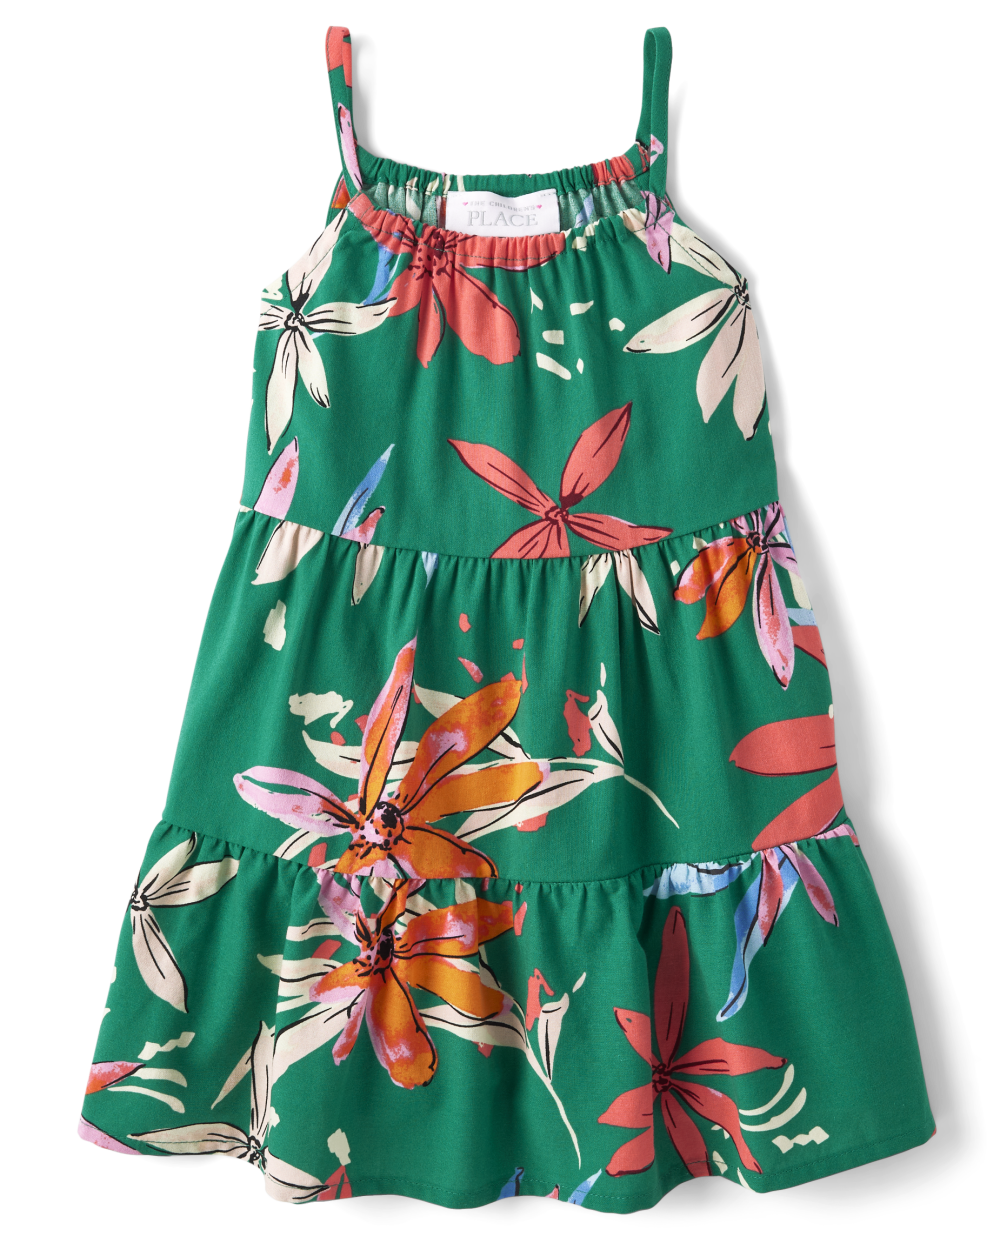 Toddler Sleeveless Halter Above the Knee Tiered Floral Print Dress